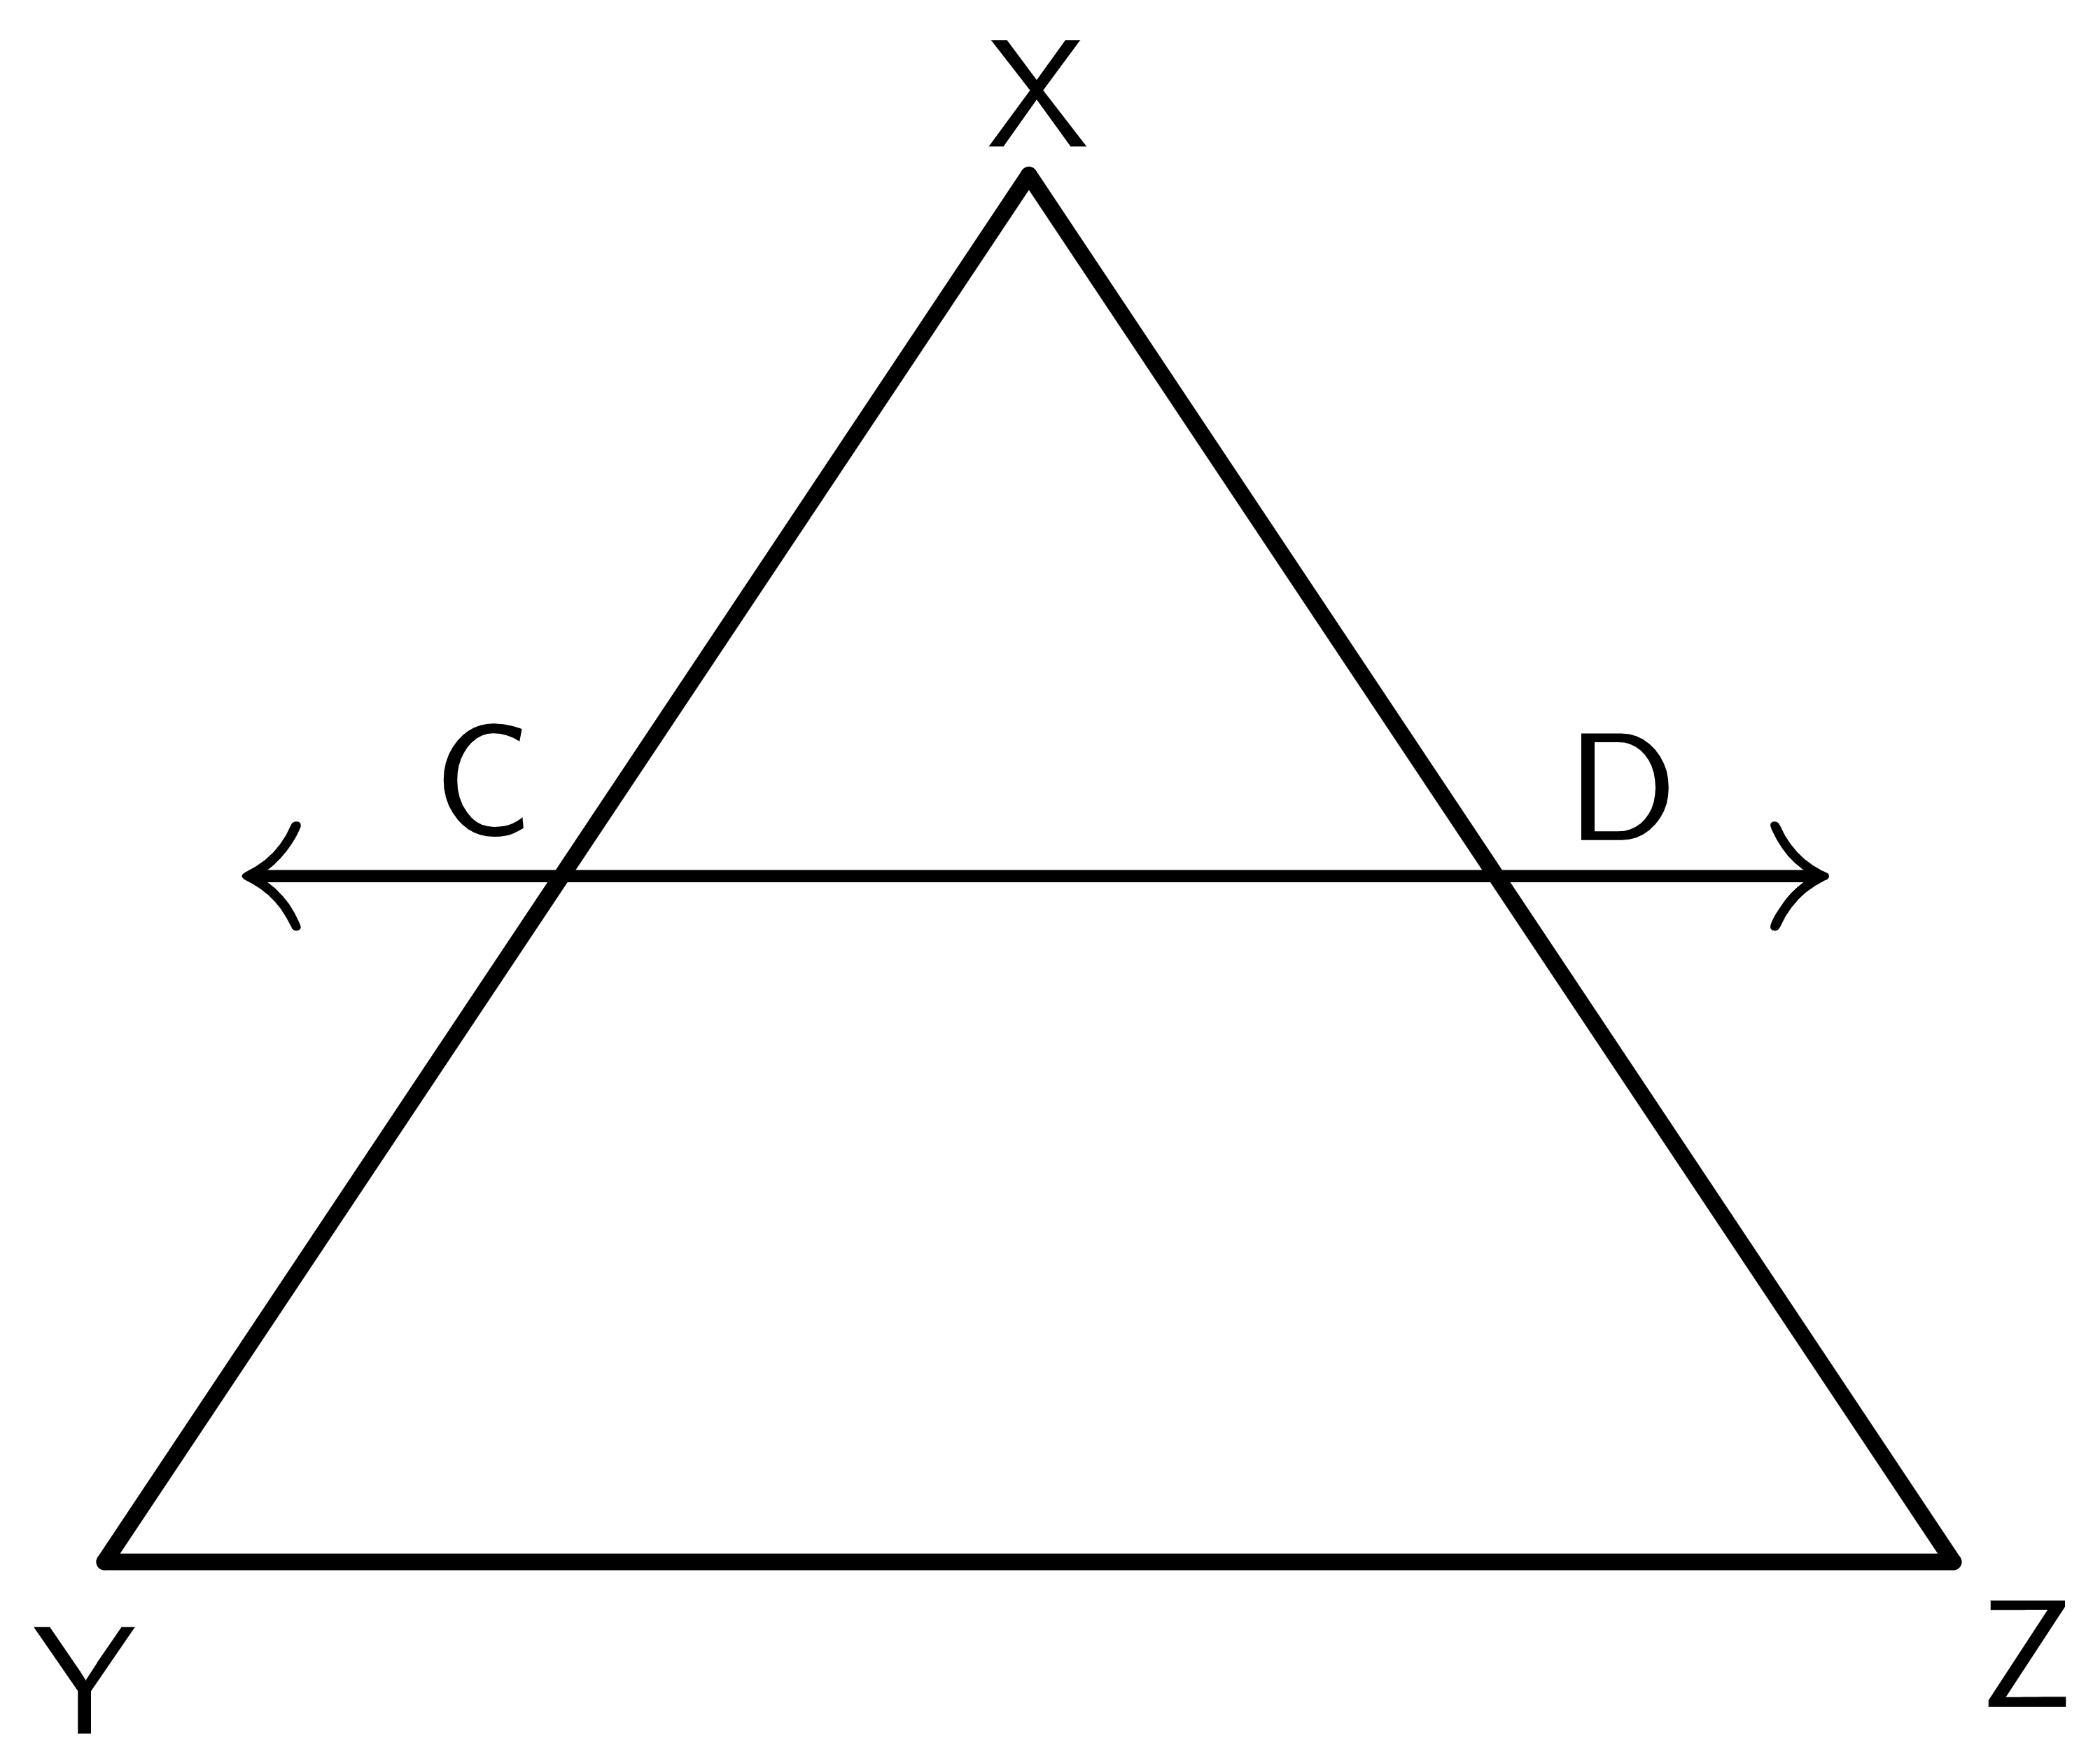 Triangle proportionality theorem fig